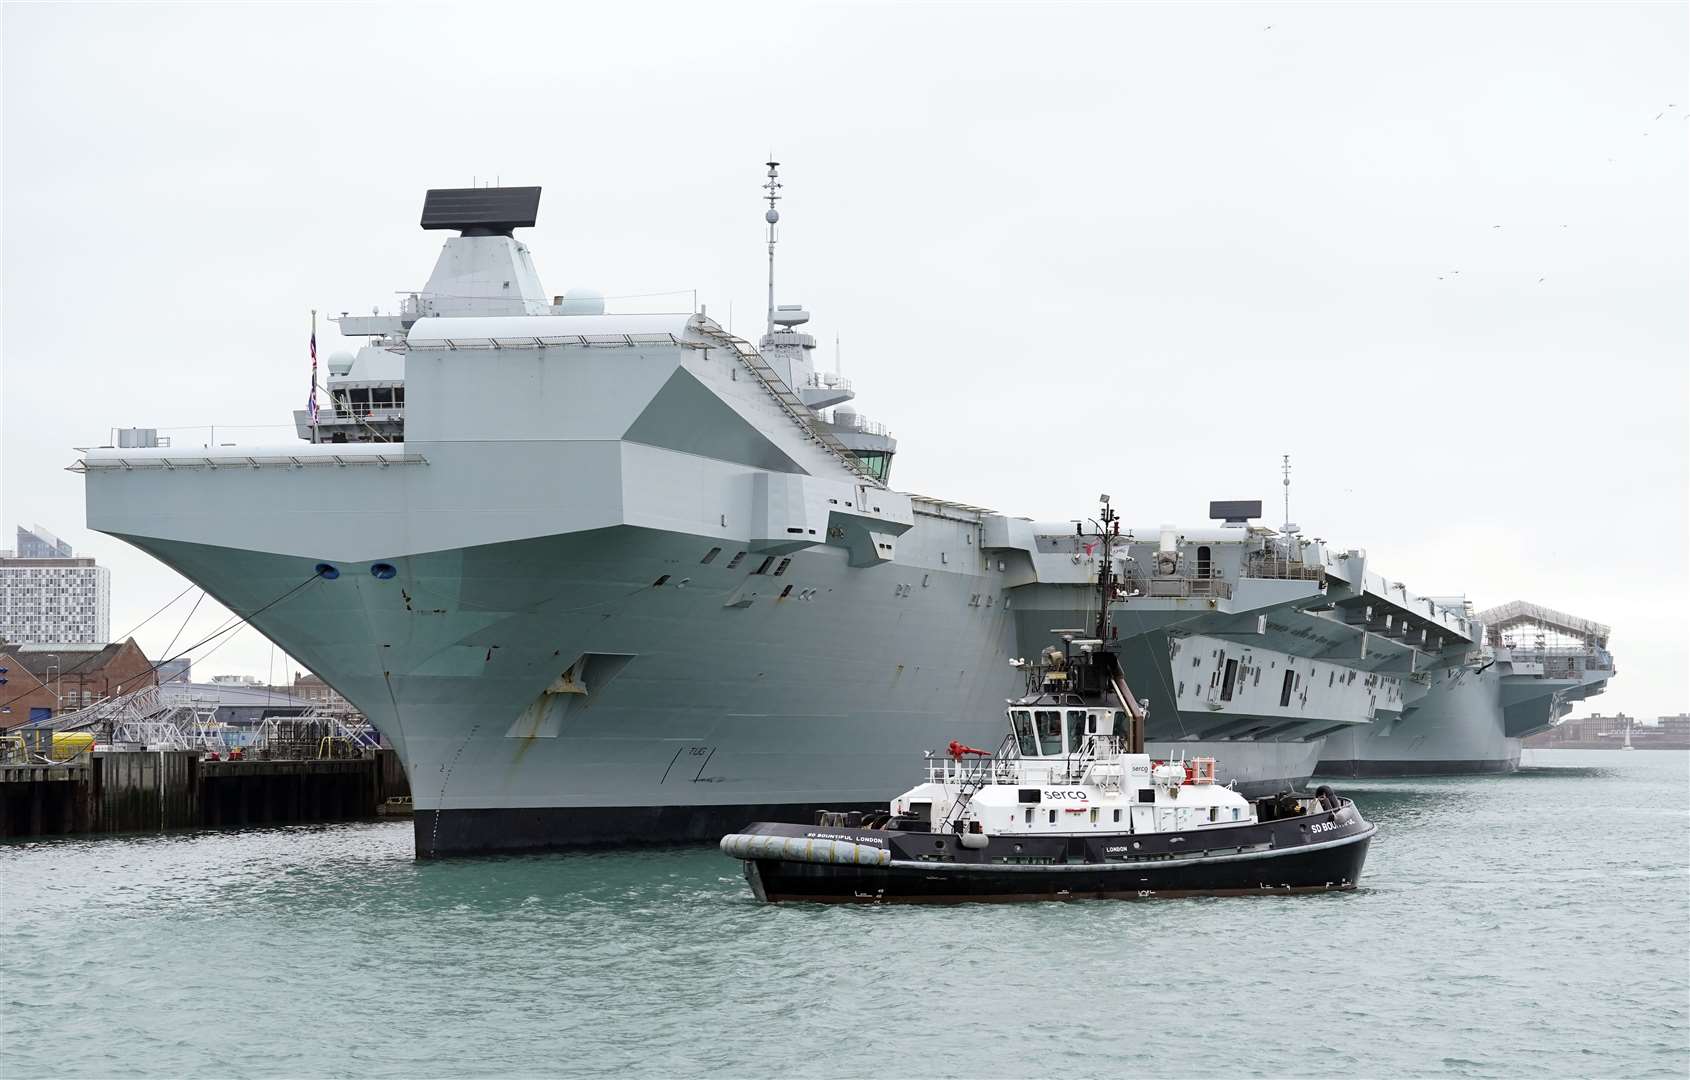 The Royal Navy aircraft carriers HMS Queen Elizabeth (left) and HMS Prince of Wales alongside at HMNB Portsmouth on Sunday (Andrew Matthews/PA)